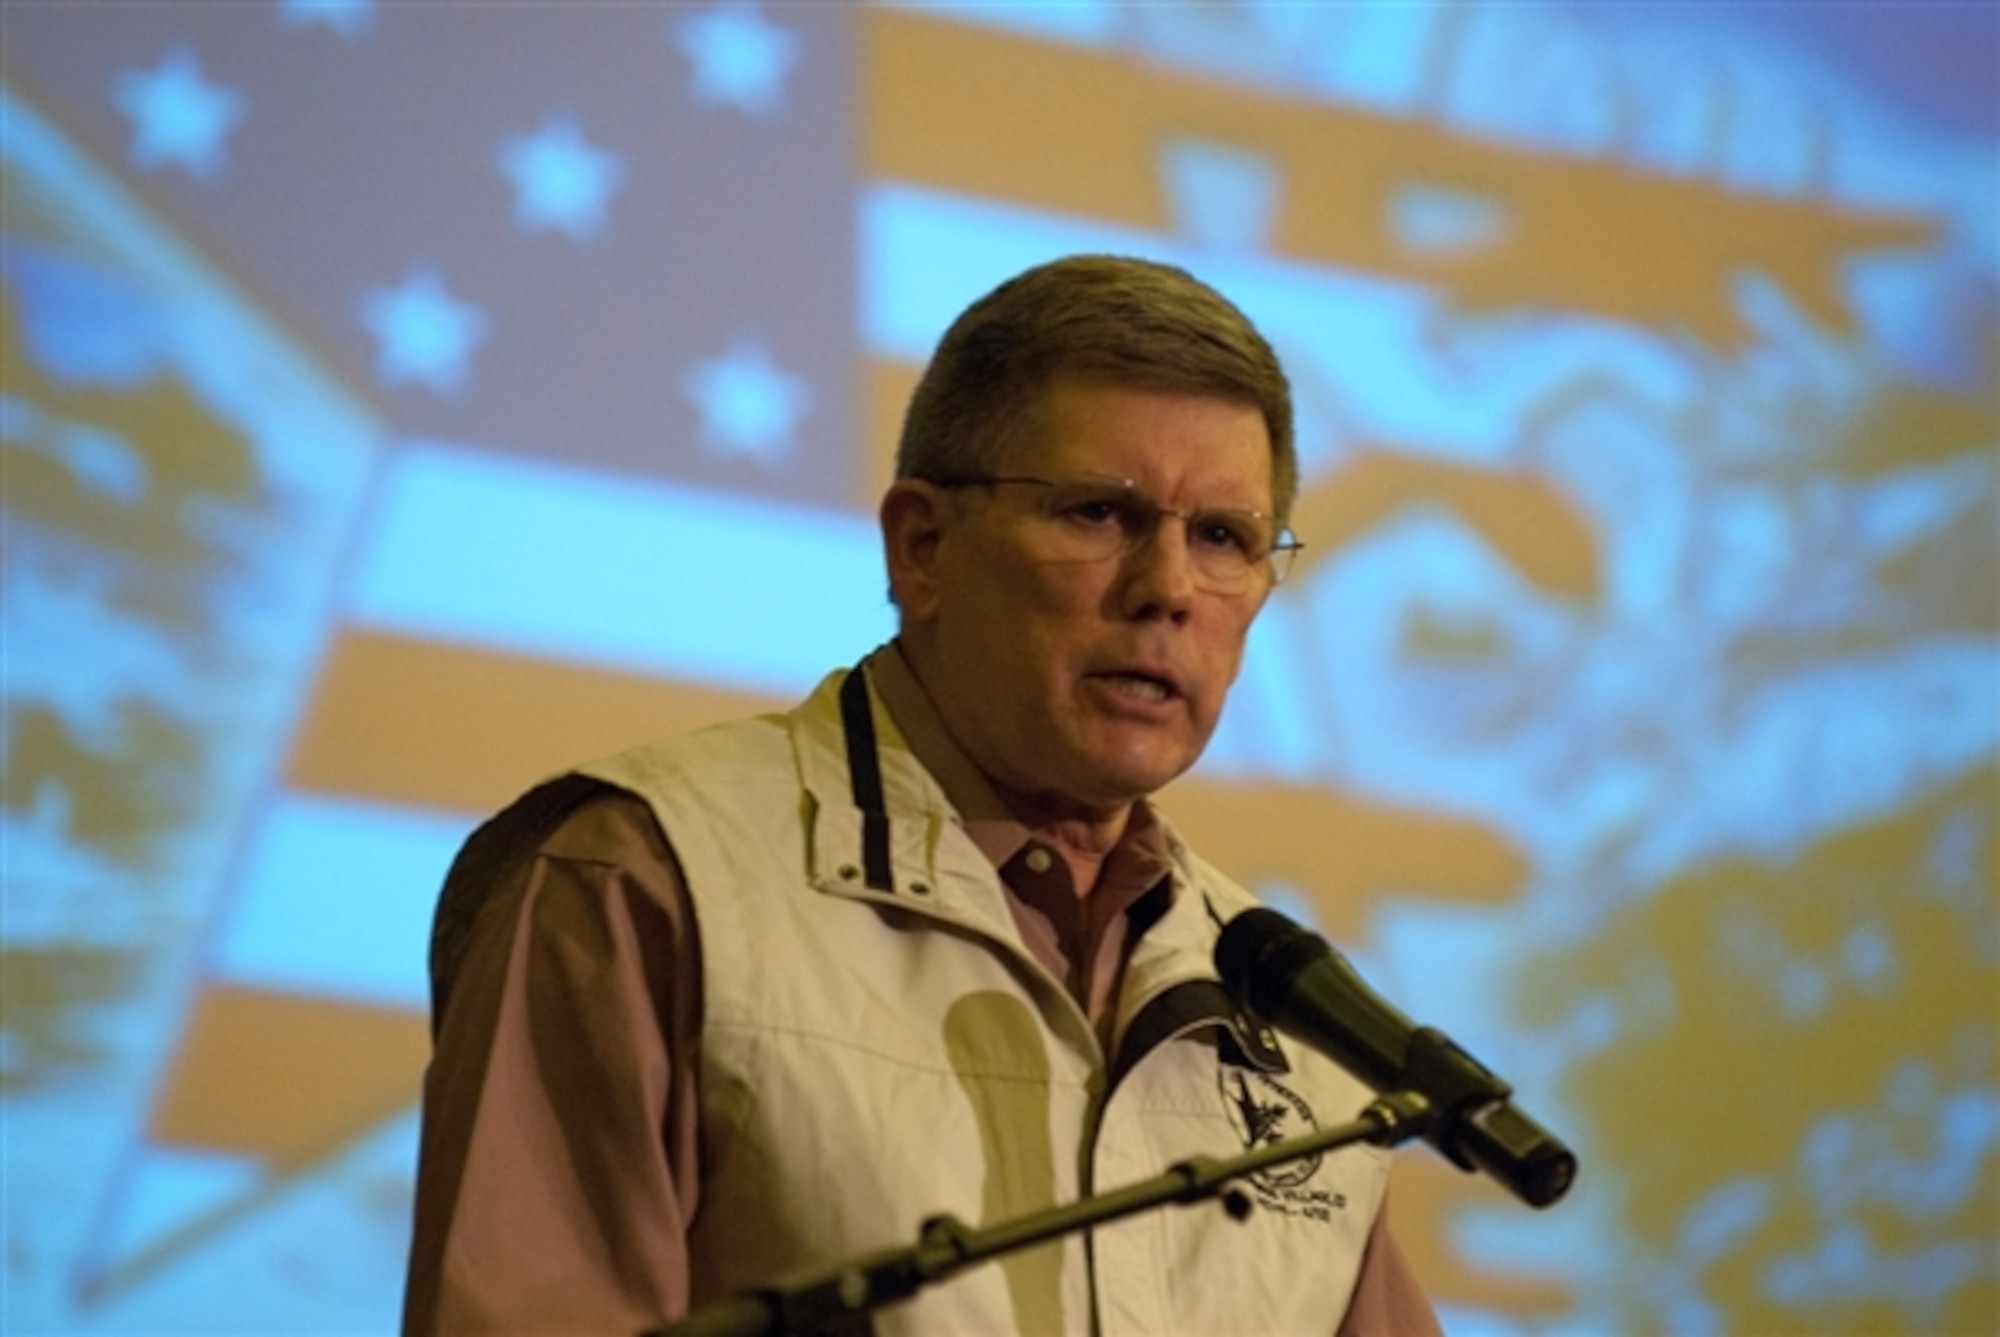 Wallace E. “Wally” Tyson, the national commander of the Disabled American Veterans, addresses participants in March 2011 during the National Disabled Veterans Winter Sports Clinic in Snowmass Village, Colo.  (Veterans Administration photo)